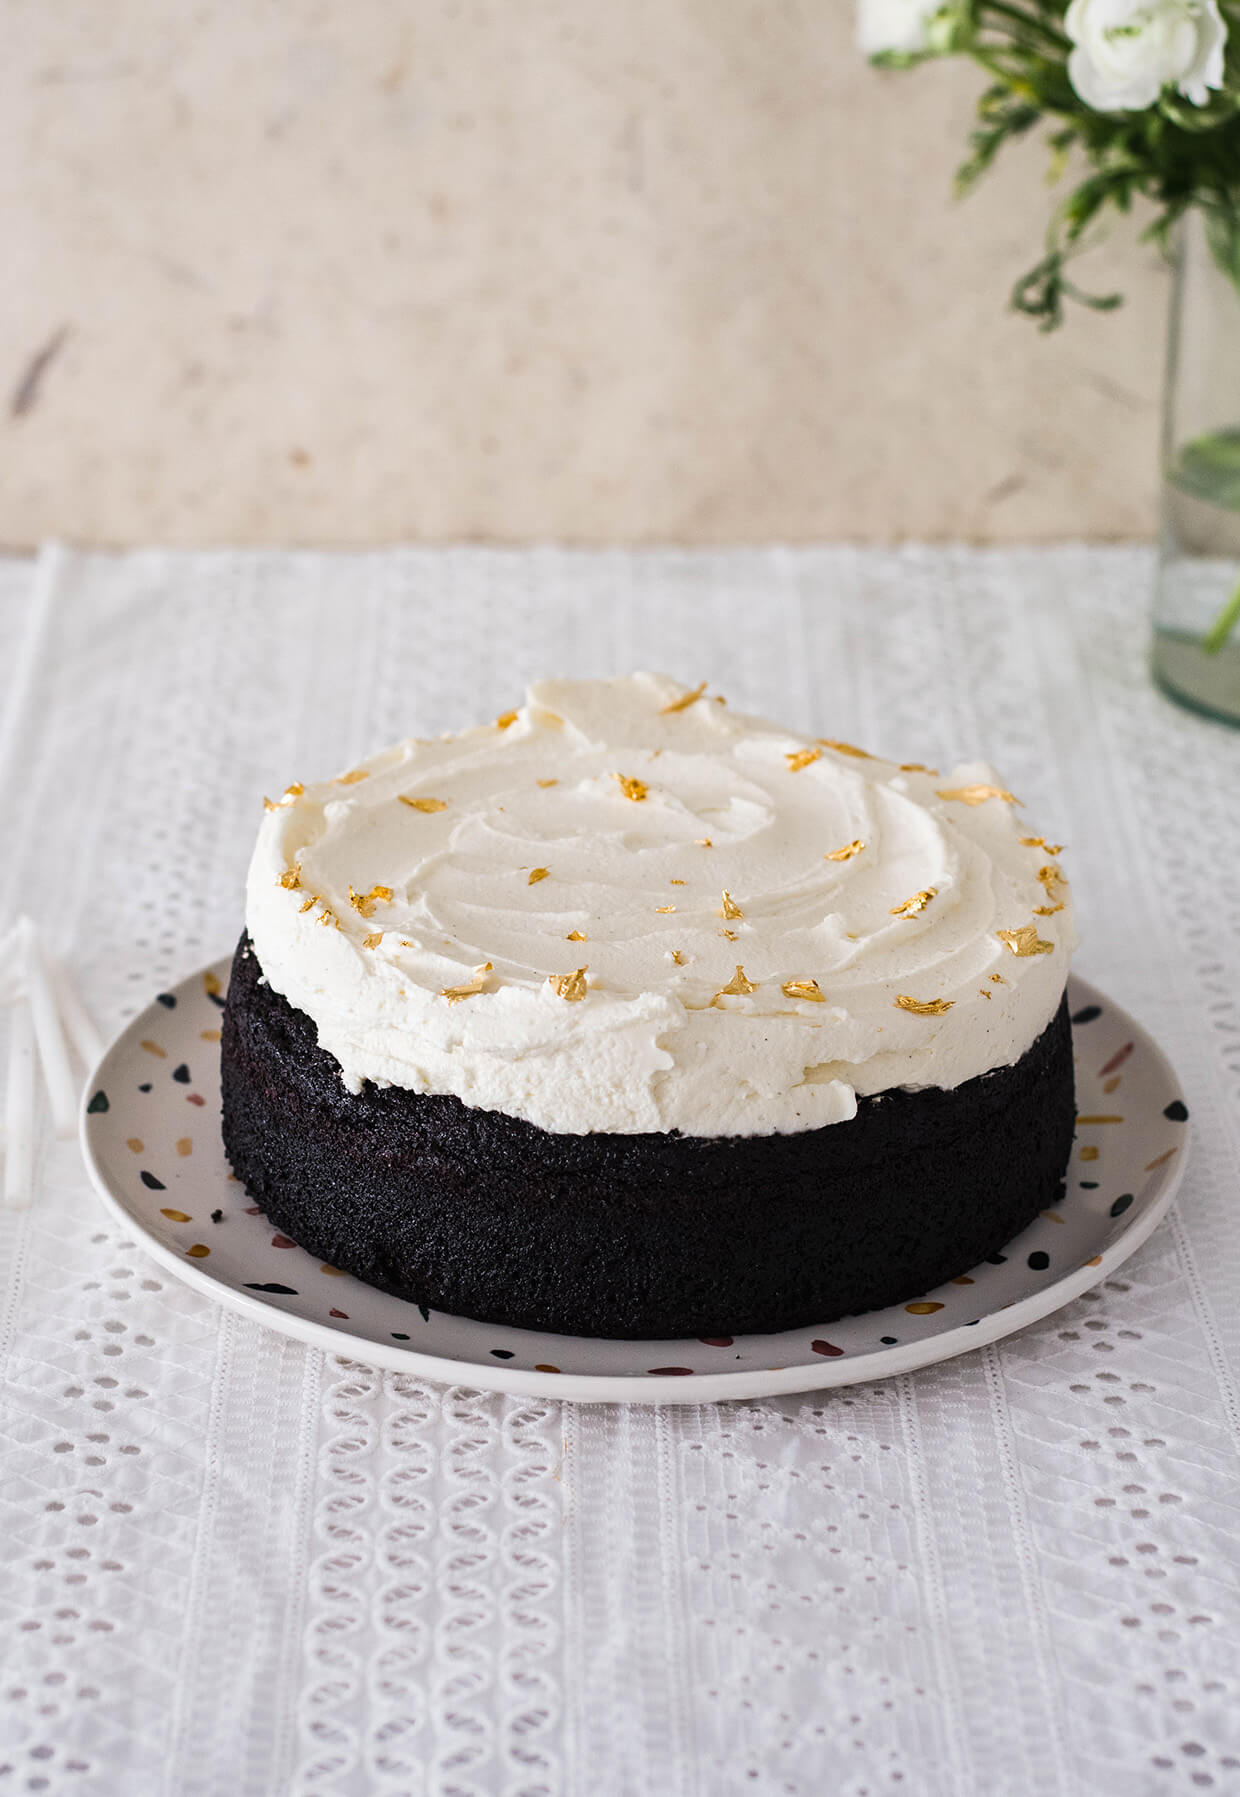 With a fierce chocolate flavor and superb mascarpone frosting, this chocolate stout cake just might be your new favorite cake! Single layer cake with plenty of frosting!